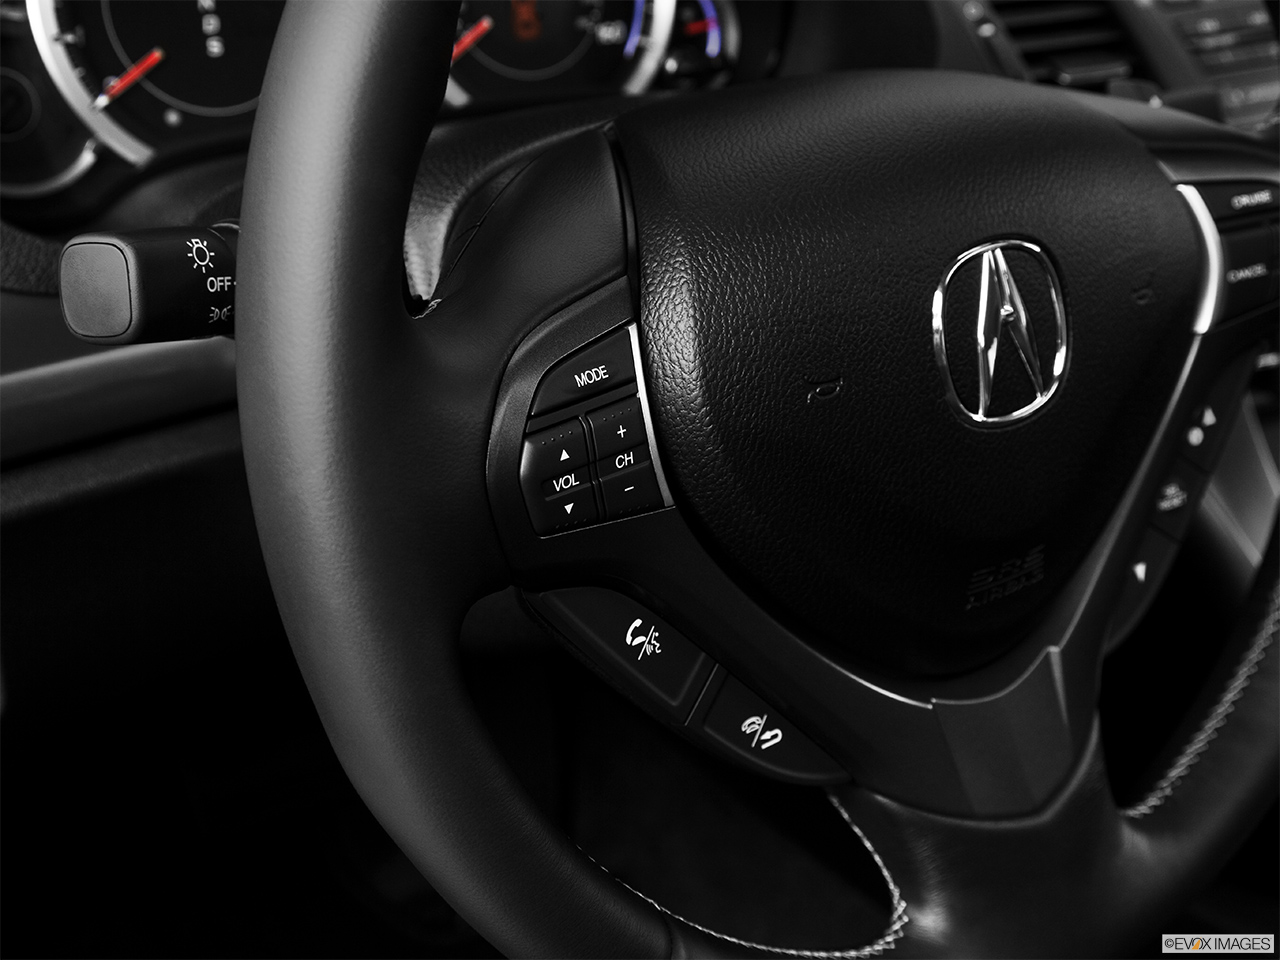 2014 Acura TSX 5-speed Automatic Steering Wheel Controls (Left Side) 